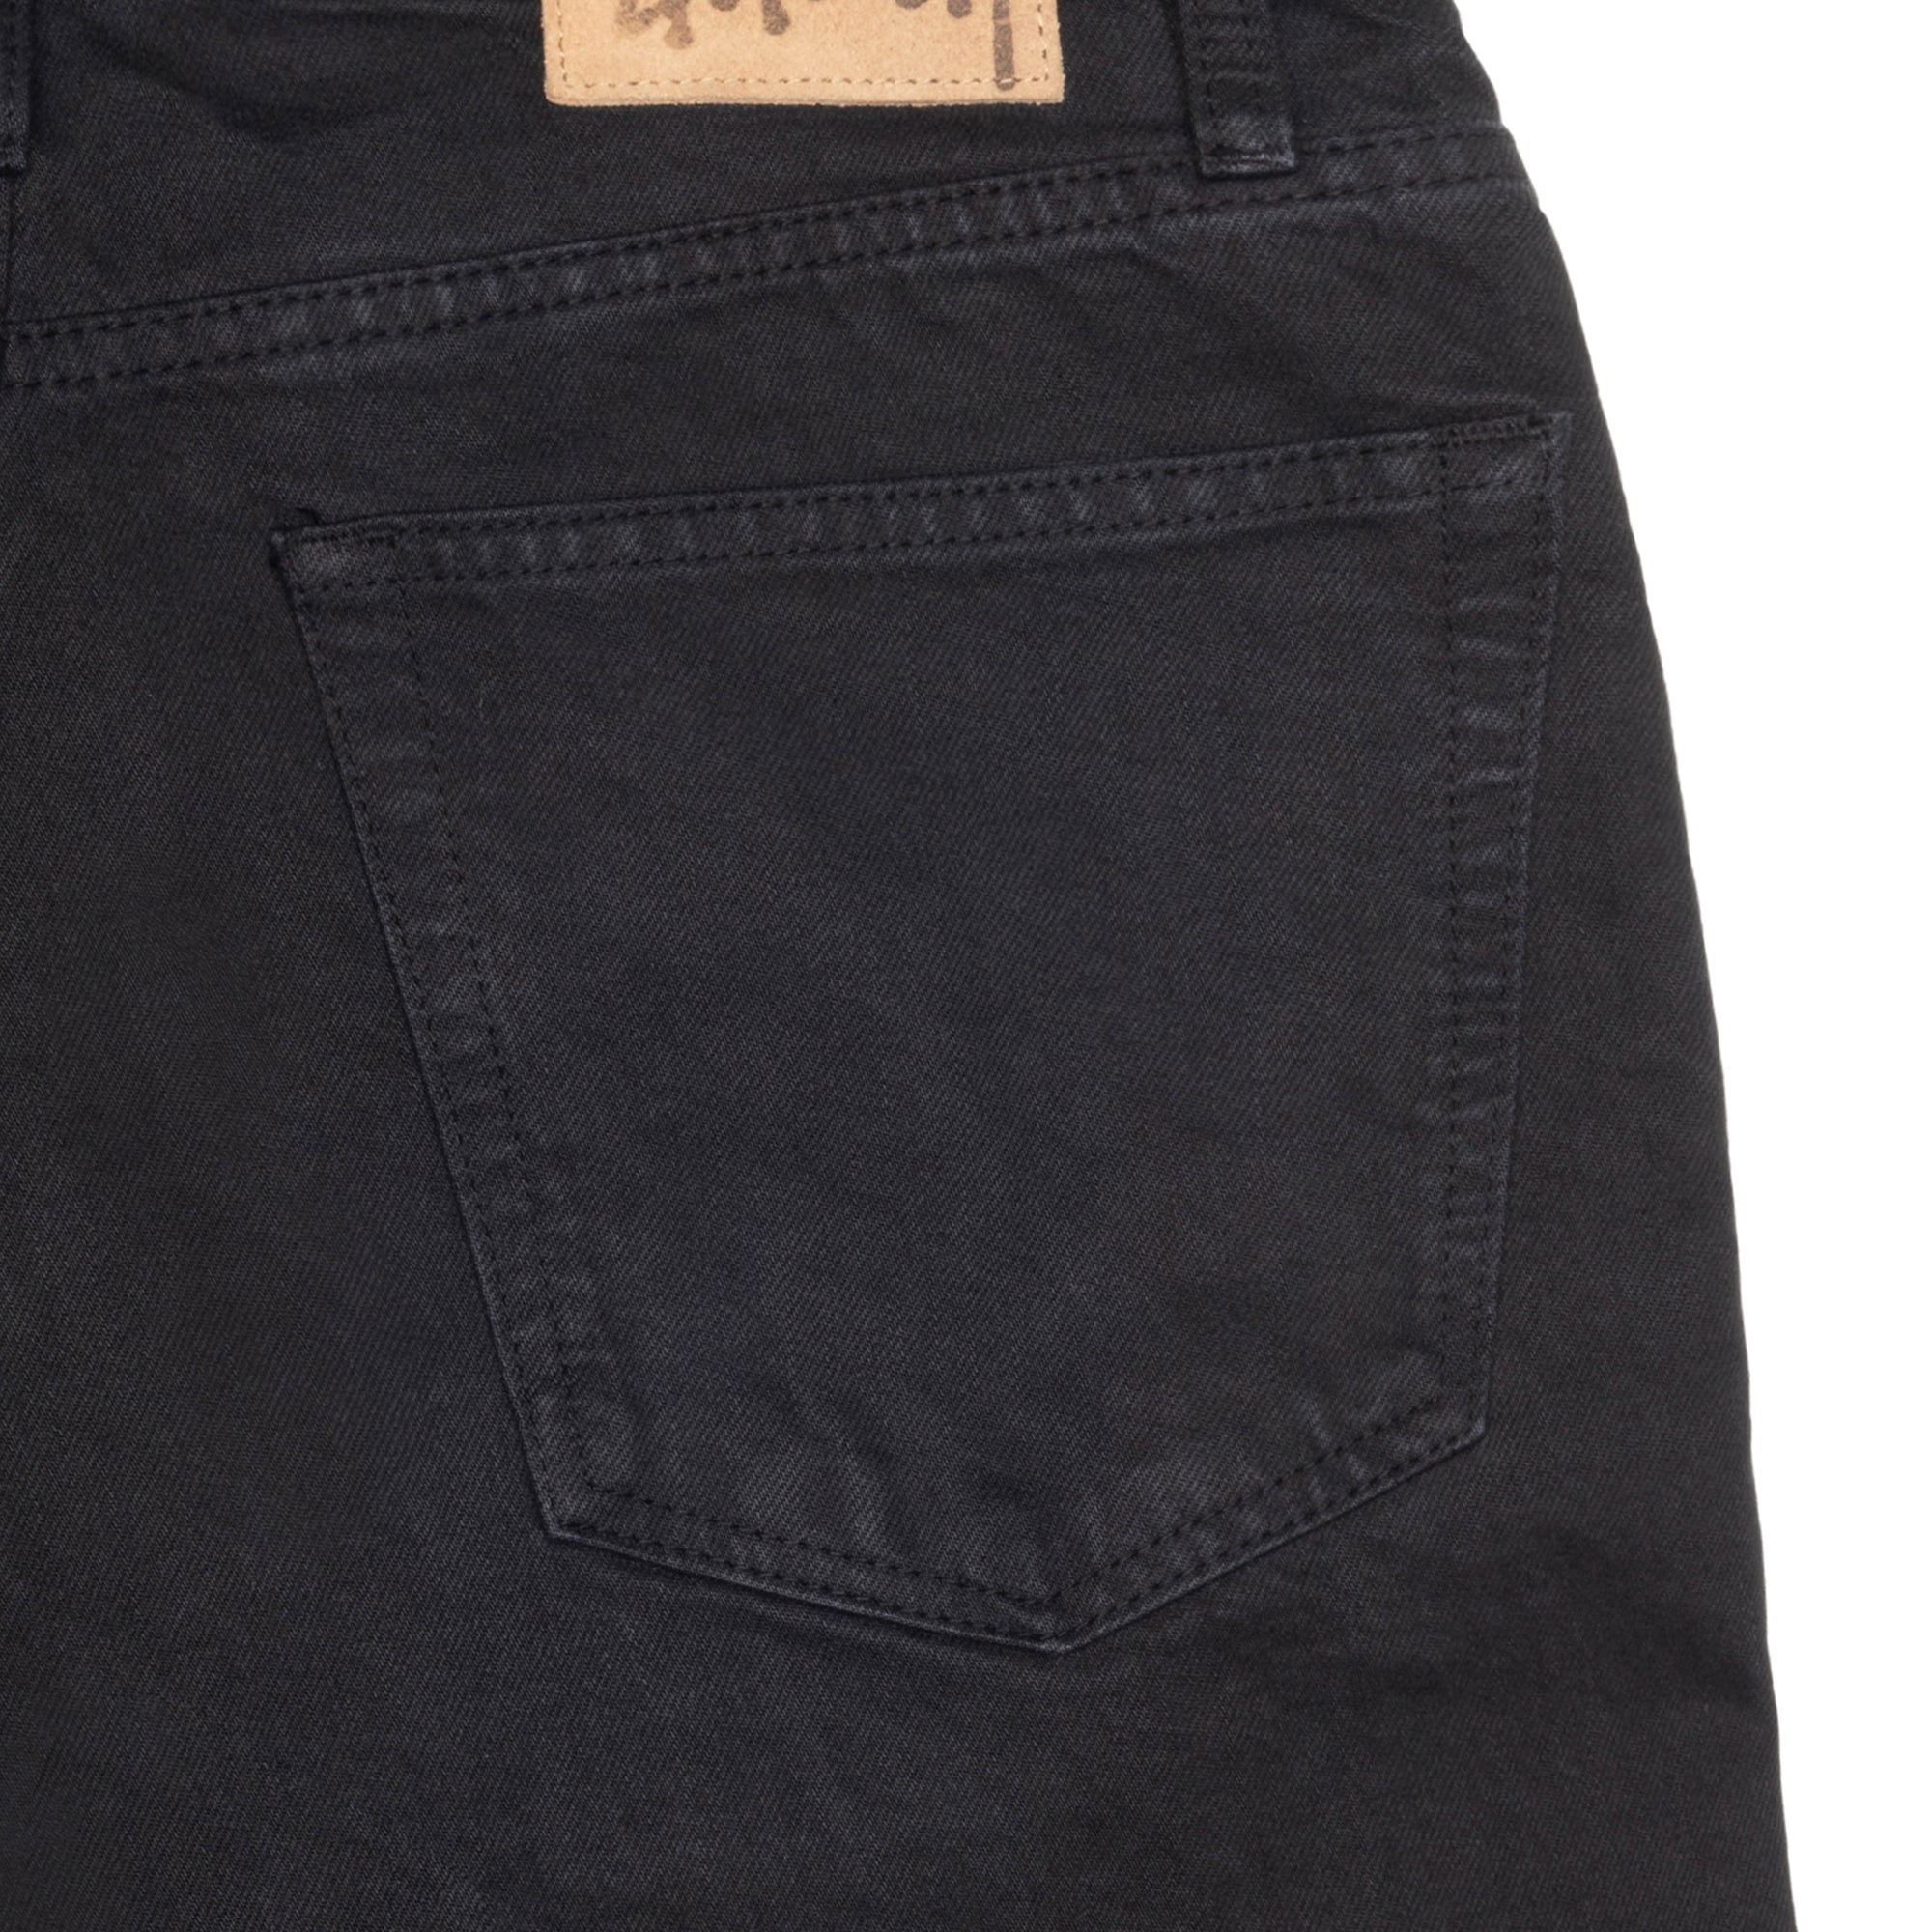 Stüssy - Overdyed Classic Jeans - (Black) view 4